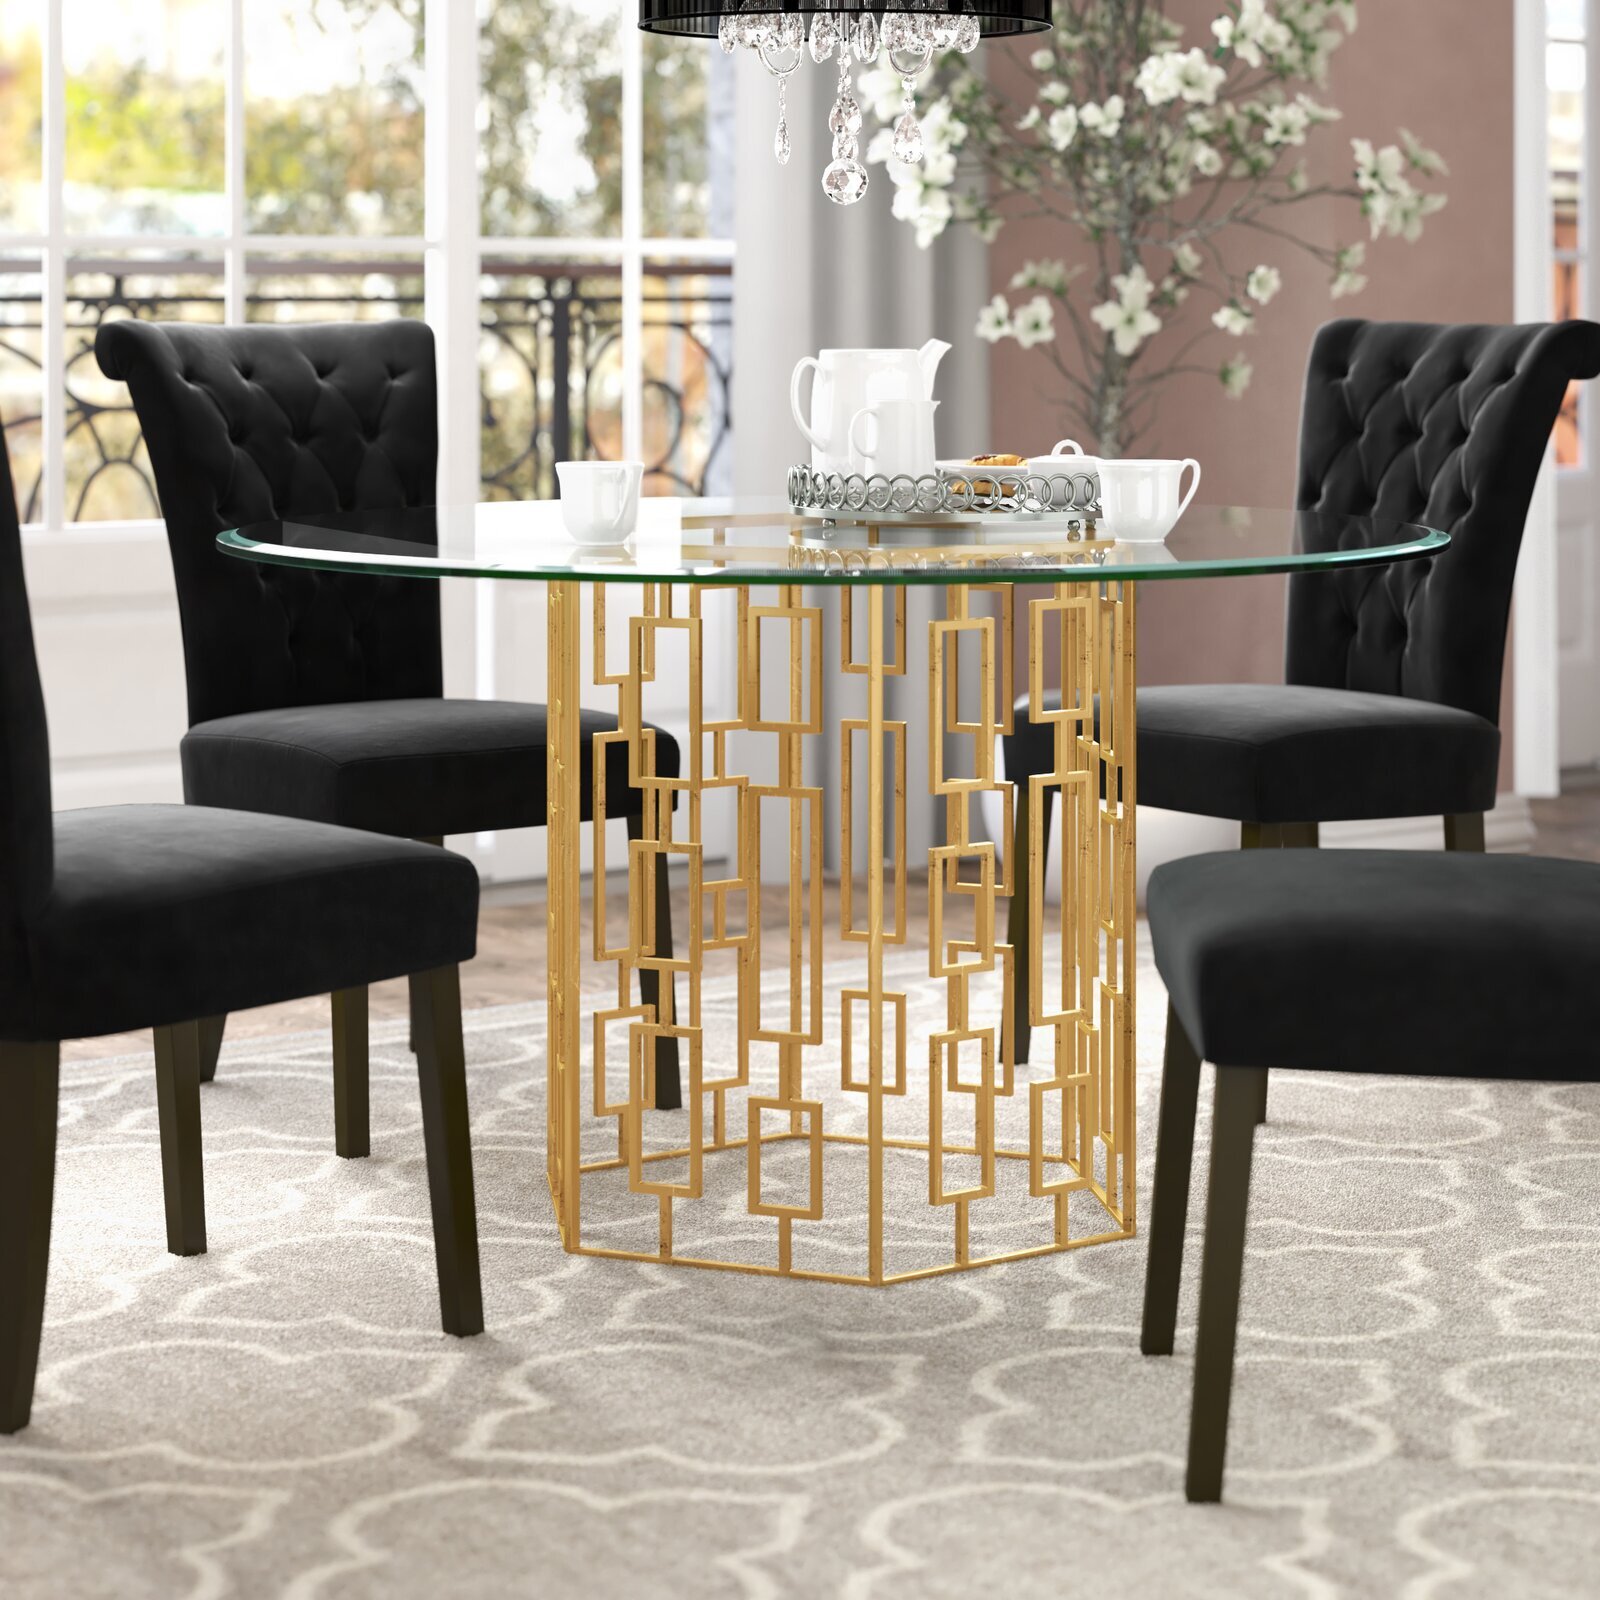 8 person round dining table with a statement base